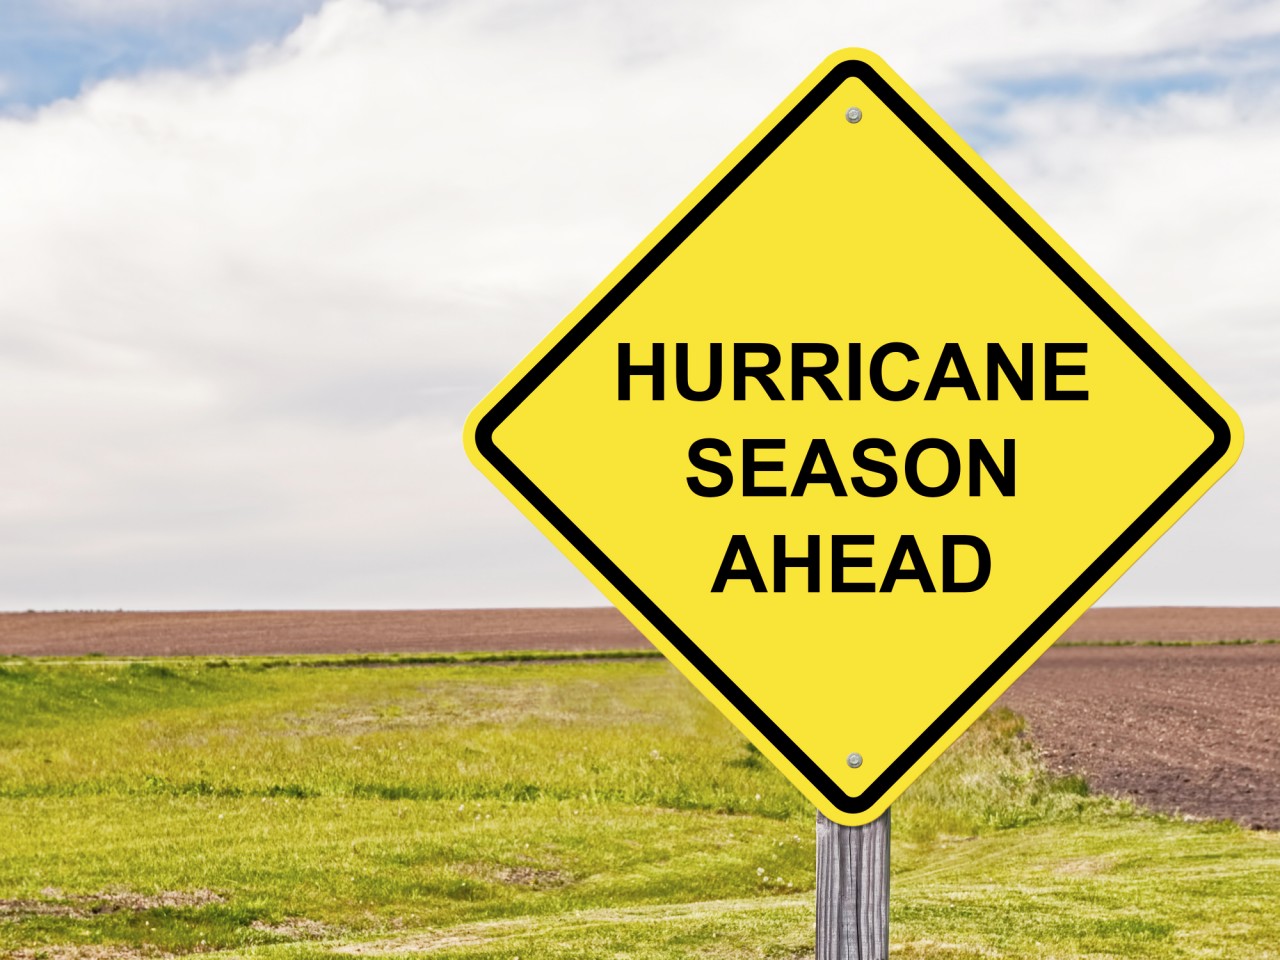 Be prepared! The importance of financial planning for hurricane season.